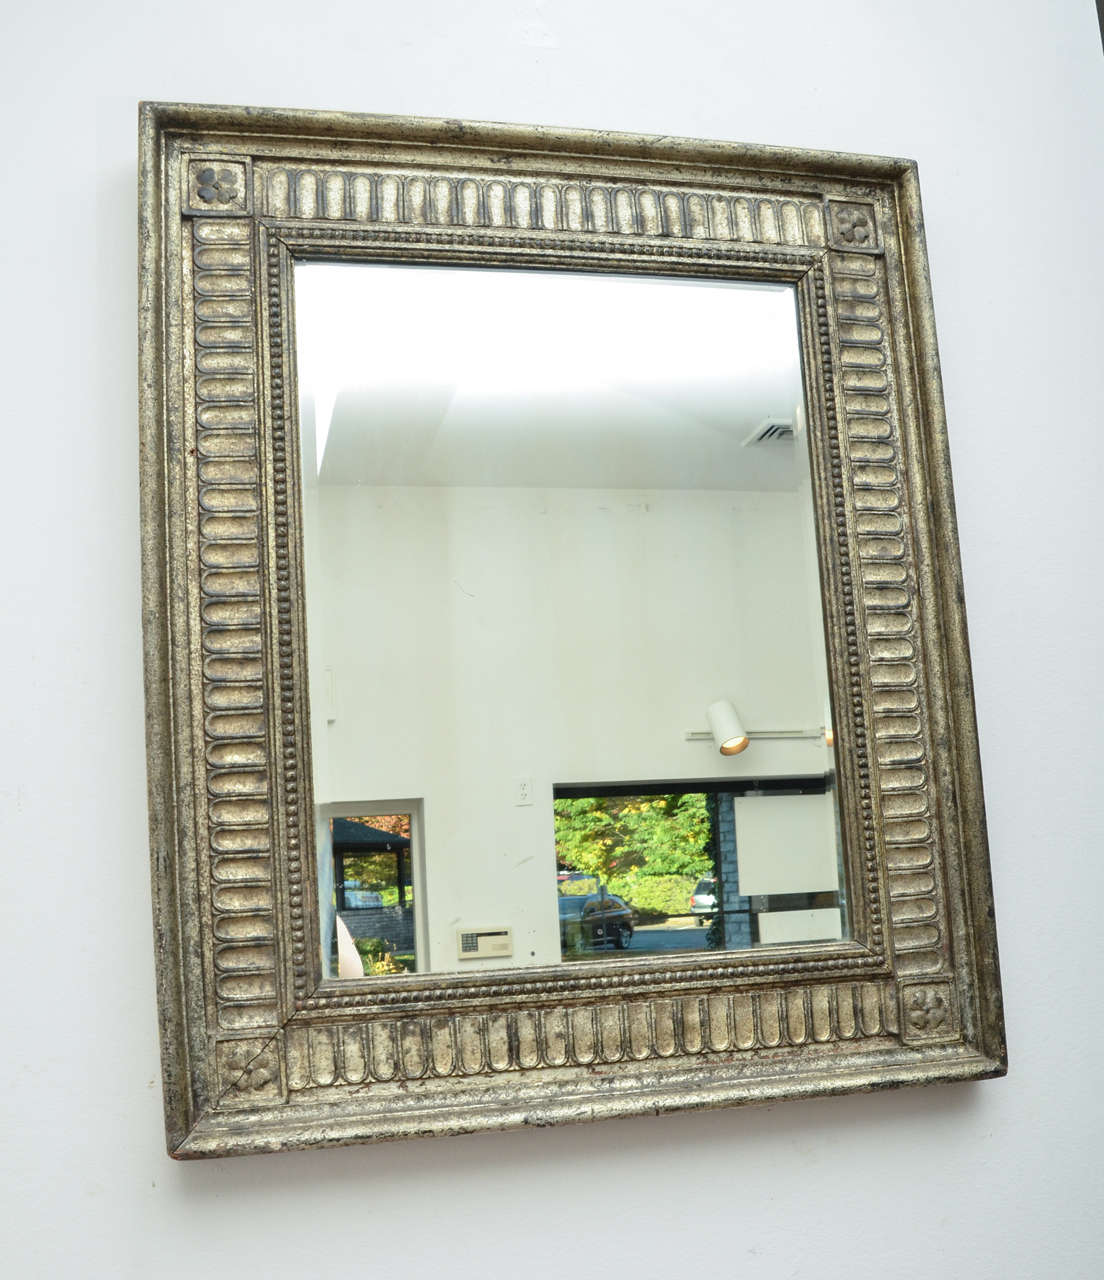 A turn-of-the-century German silver giltwood mirror with beaded frame, wonderful decorative detailing and patina.